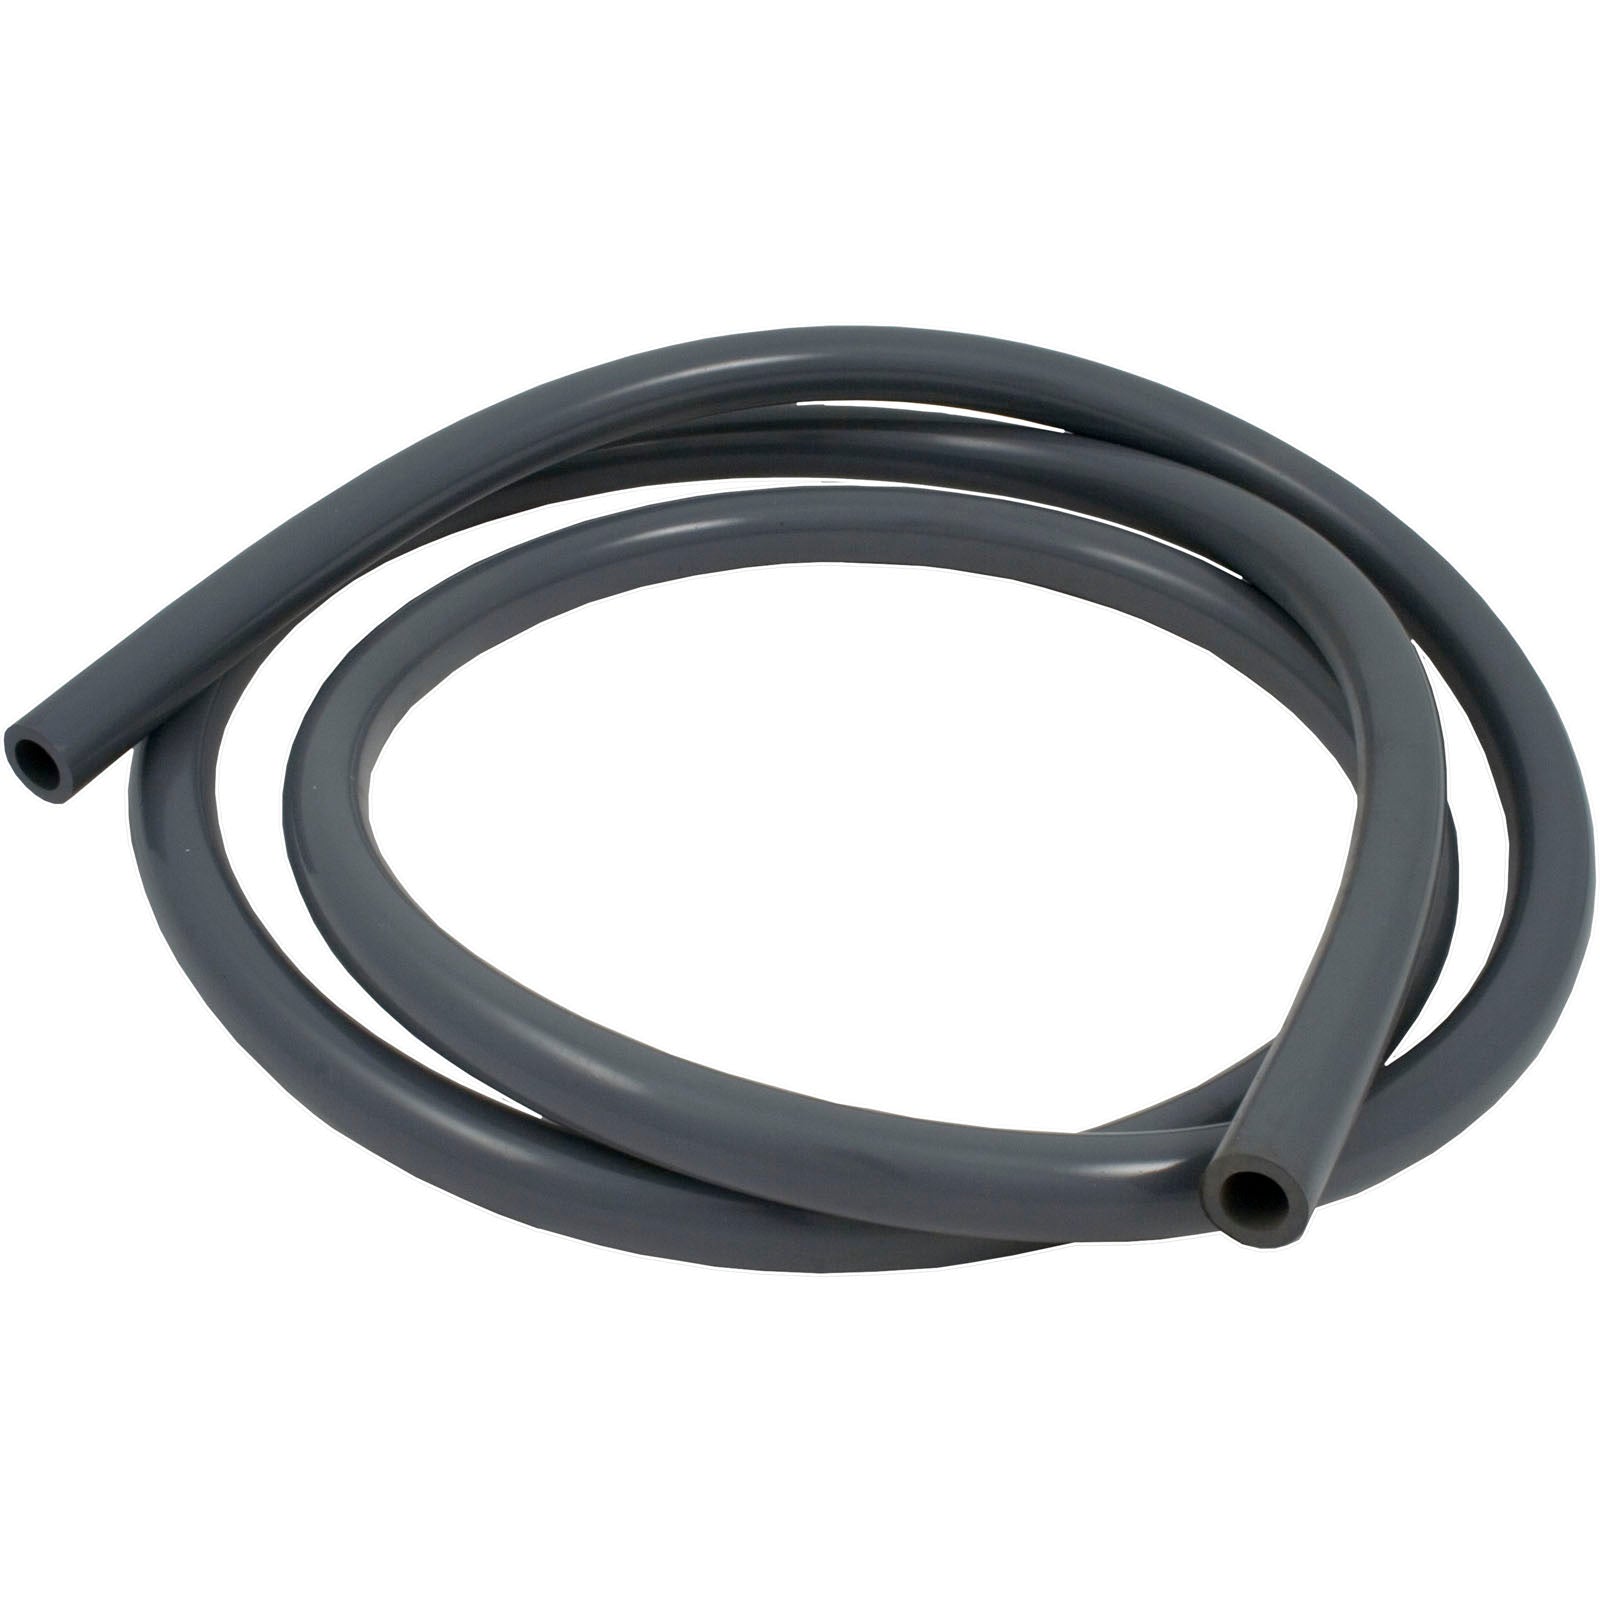 Feed Hose, Pentair Letro LL105PM Cleaner, 7 foot-8", Gray- LLD50PM